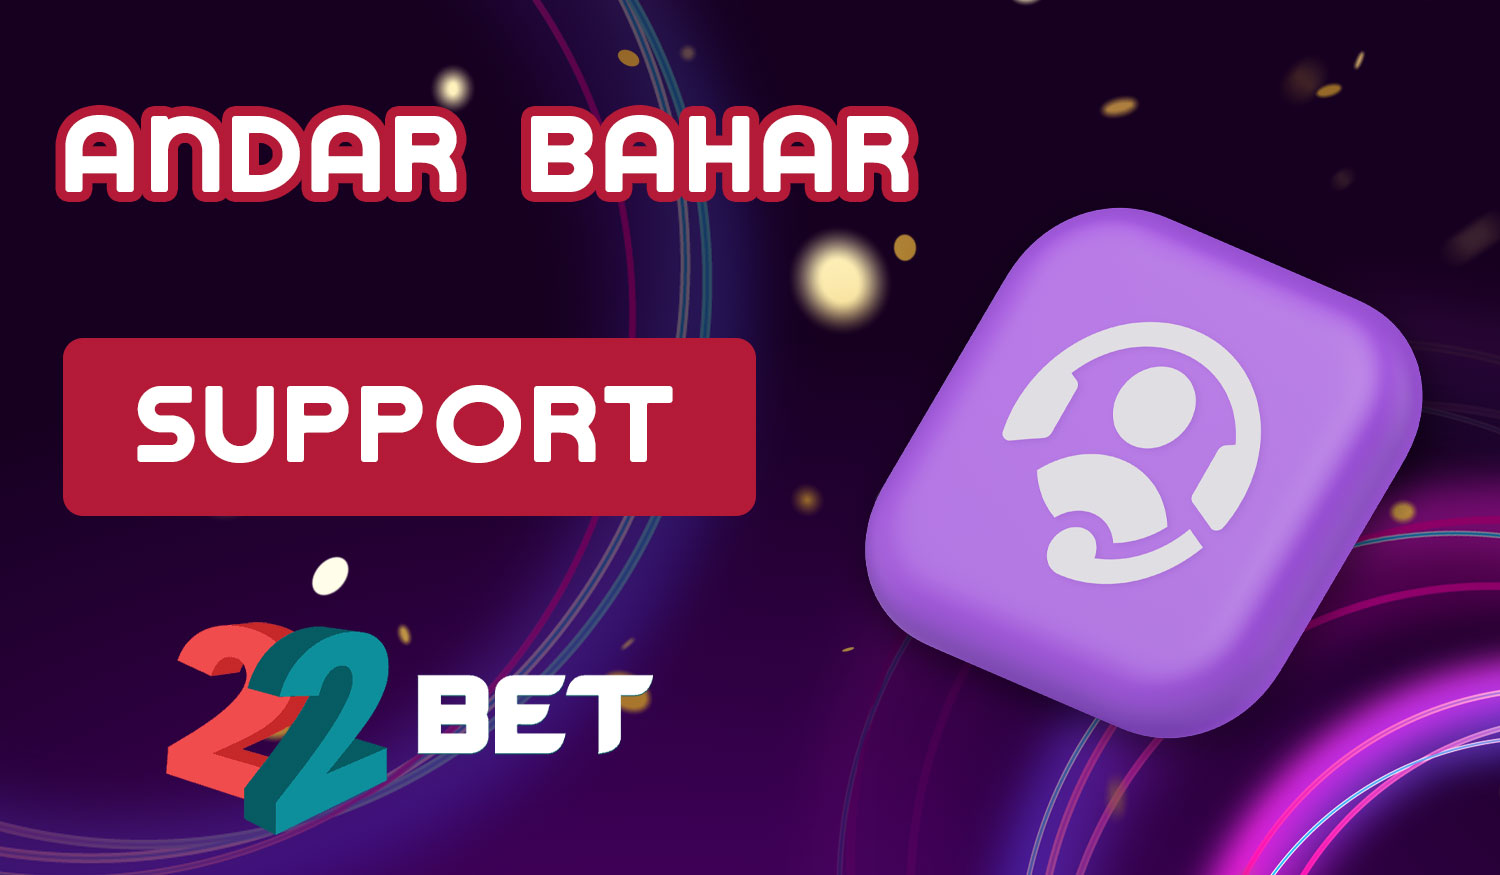 The online casino 22Bet India provides 24/7 full support on its platform for players